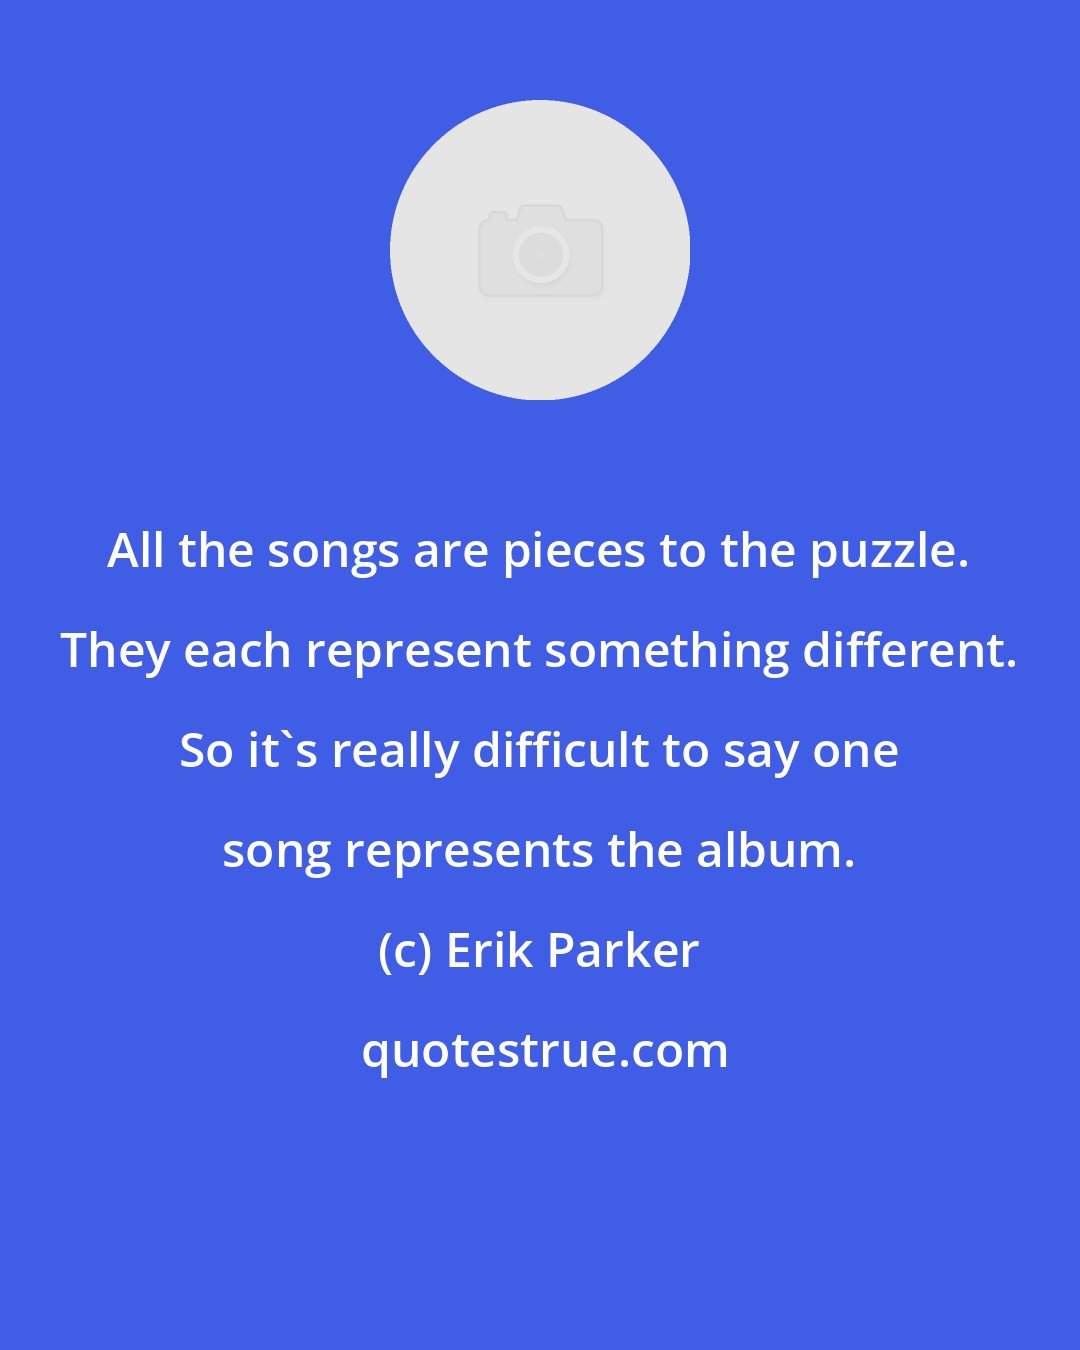 Erik Parker: All the songs are pieces to the puzzle. They each represent something different. So it's really difficult to say one song represents the album.